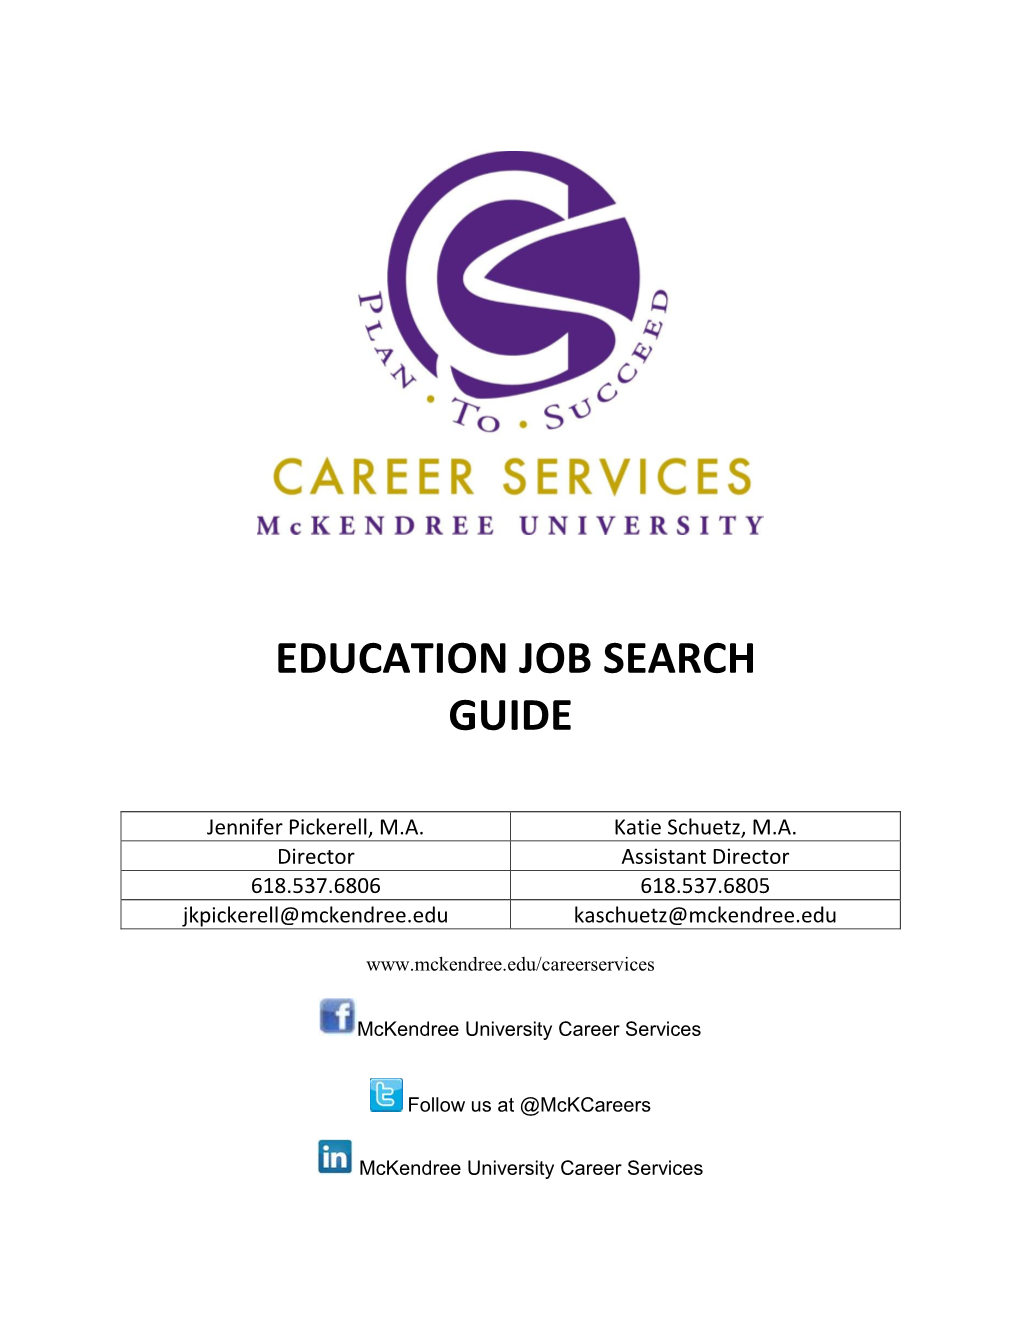 Education Job Search Guide